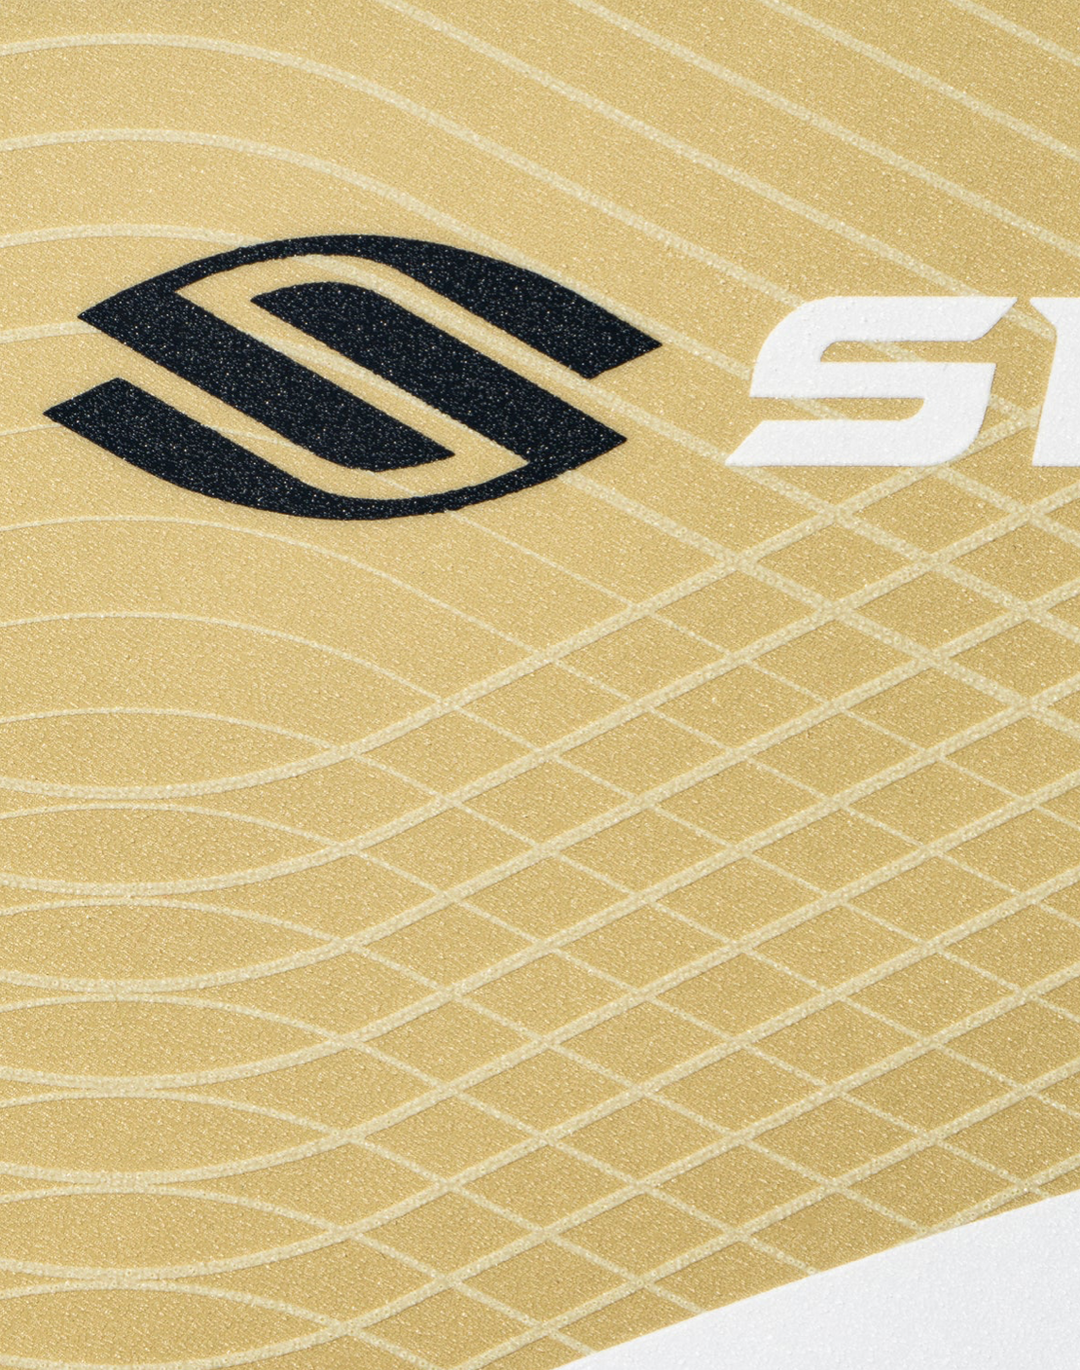 LUXX Control Air Epic Pickleball Paddle - Gold